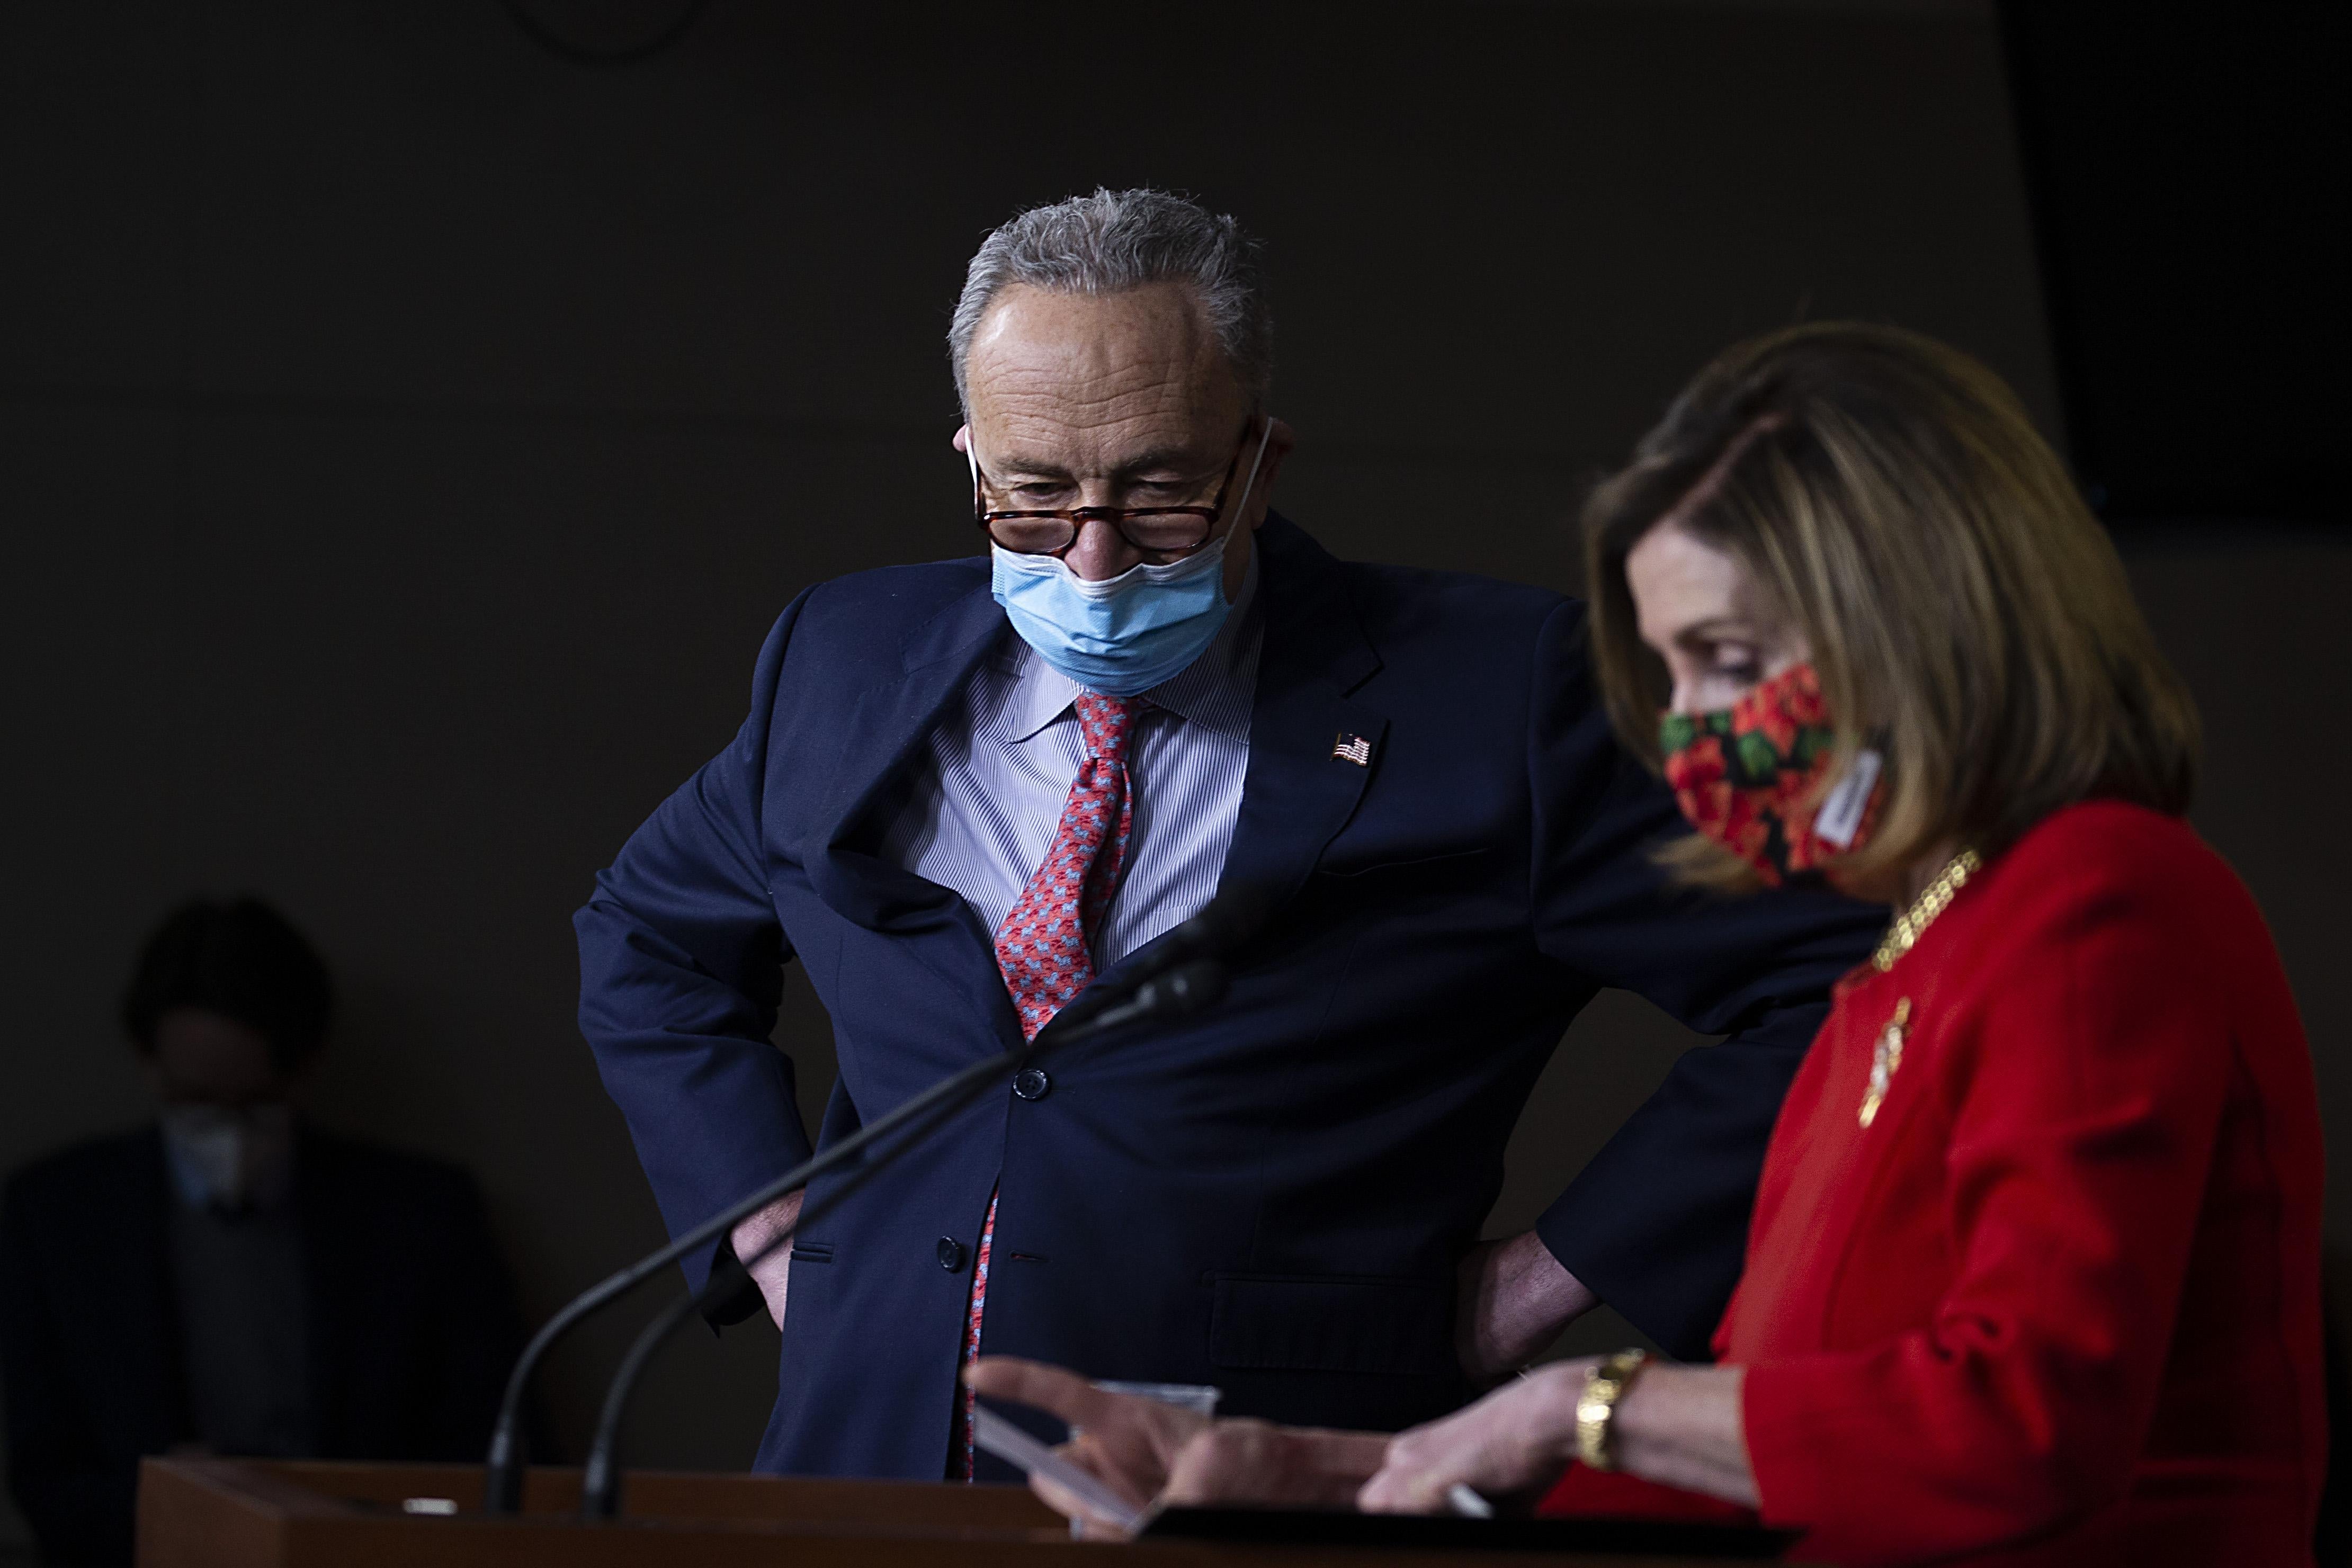 Chuck Schumer and Nancy Pelosi look at a podium while wearing masks.